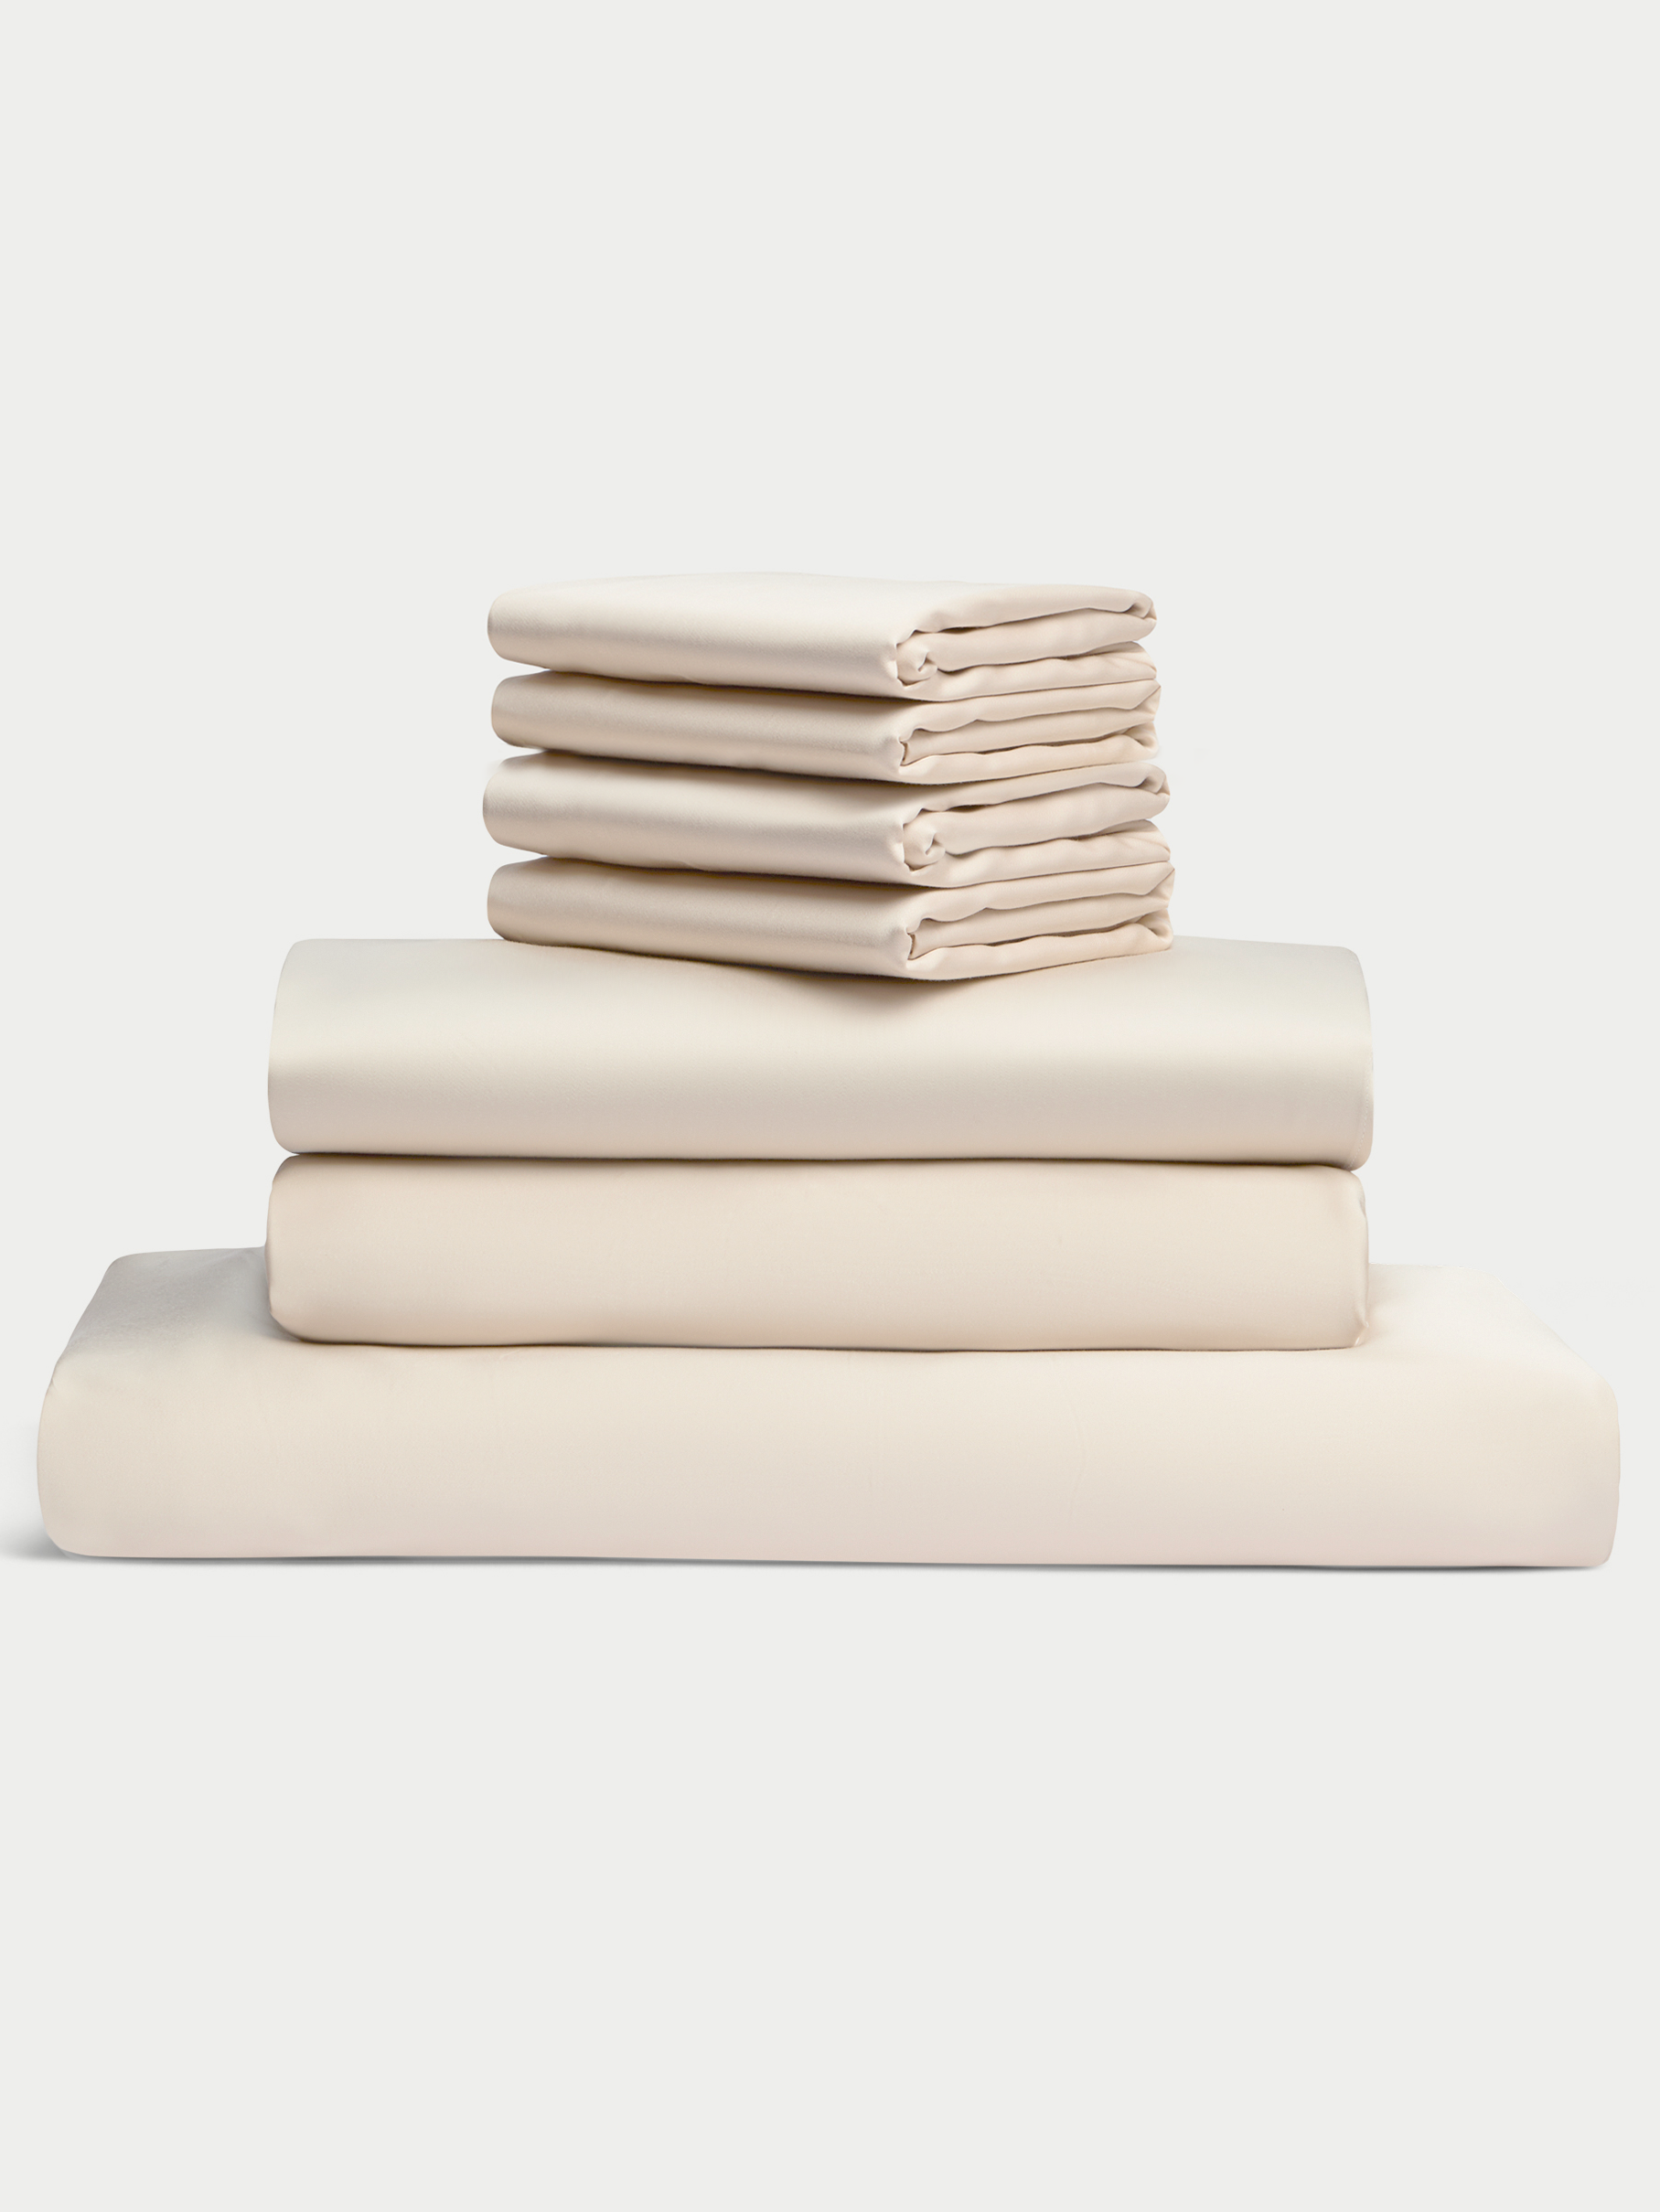 Oat bedding bundle stacked up with white background |Color:Oat